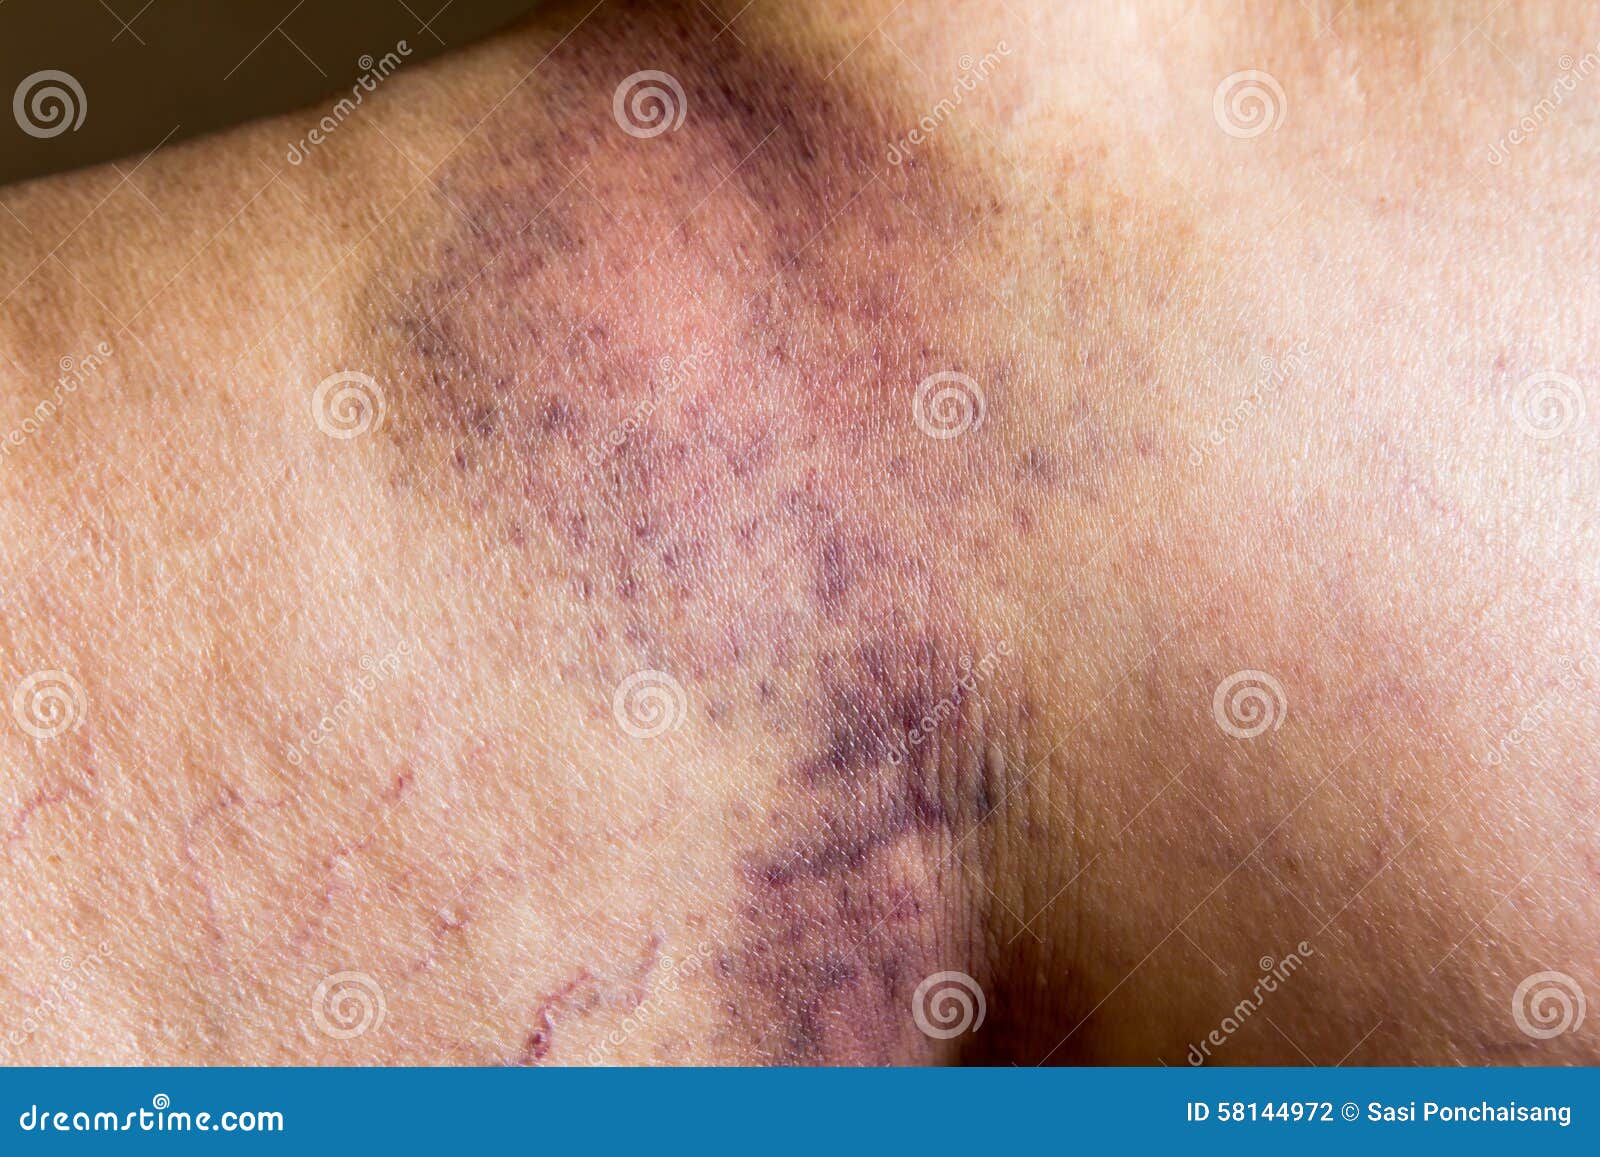 Picture Of Woman Wounded Leg 20